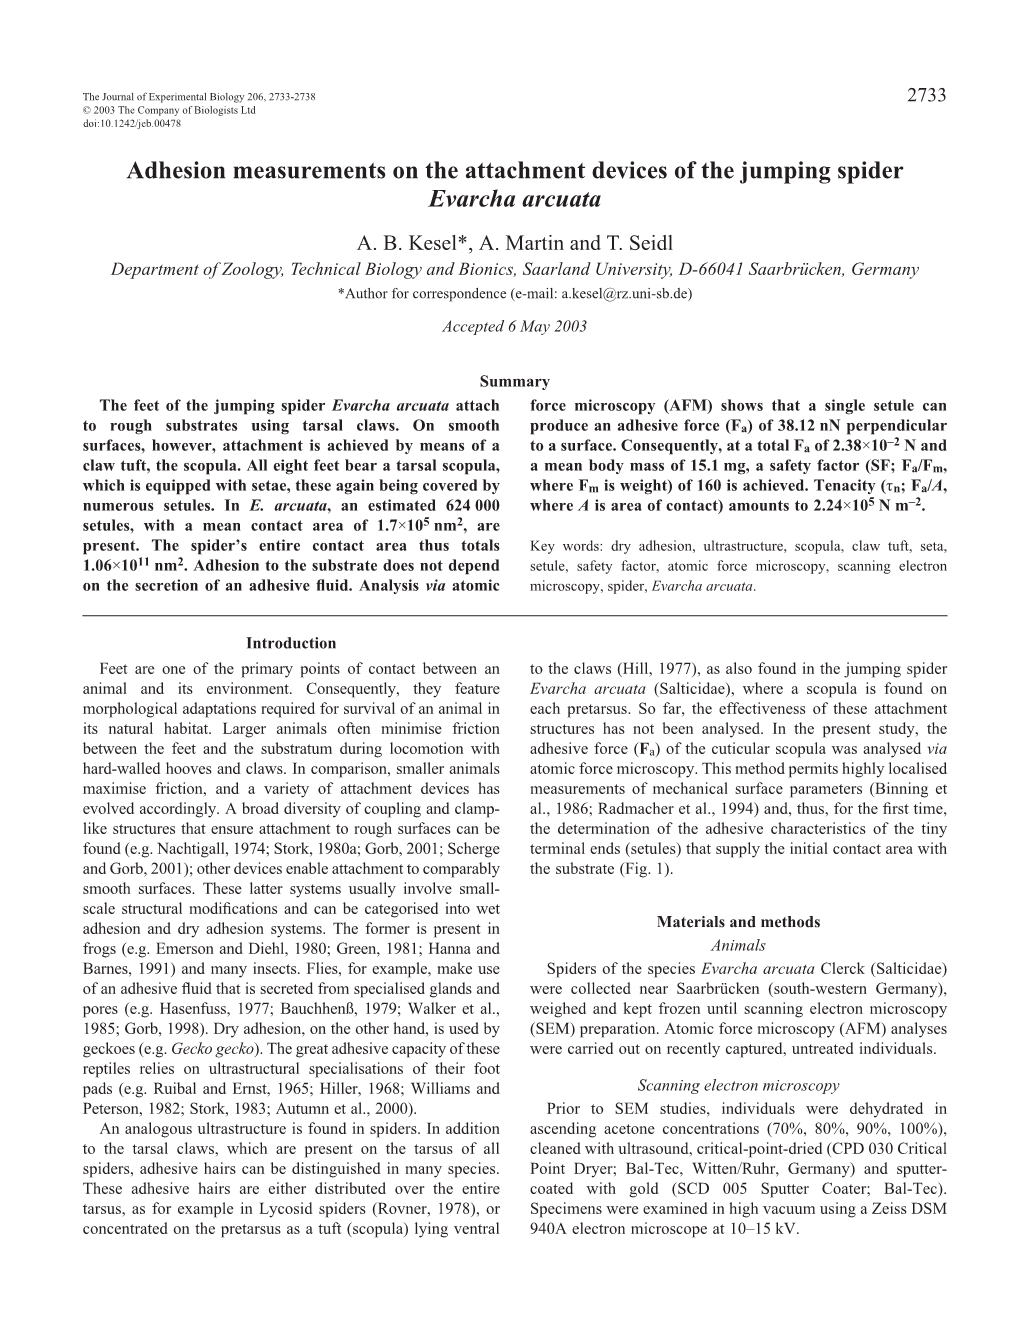 Adhesion Measurements on the Attachment Devices of the Jumping Spider Evarcha Arcuata A